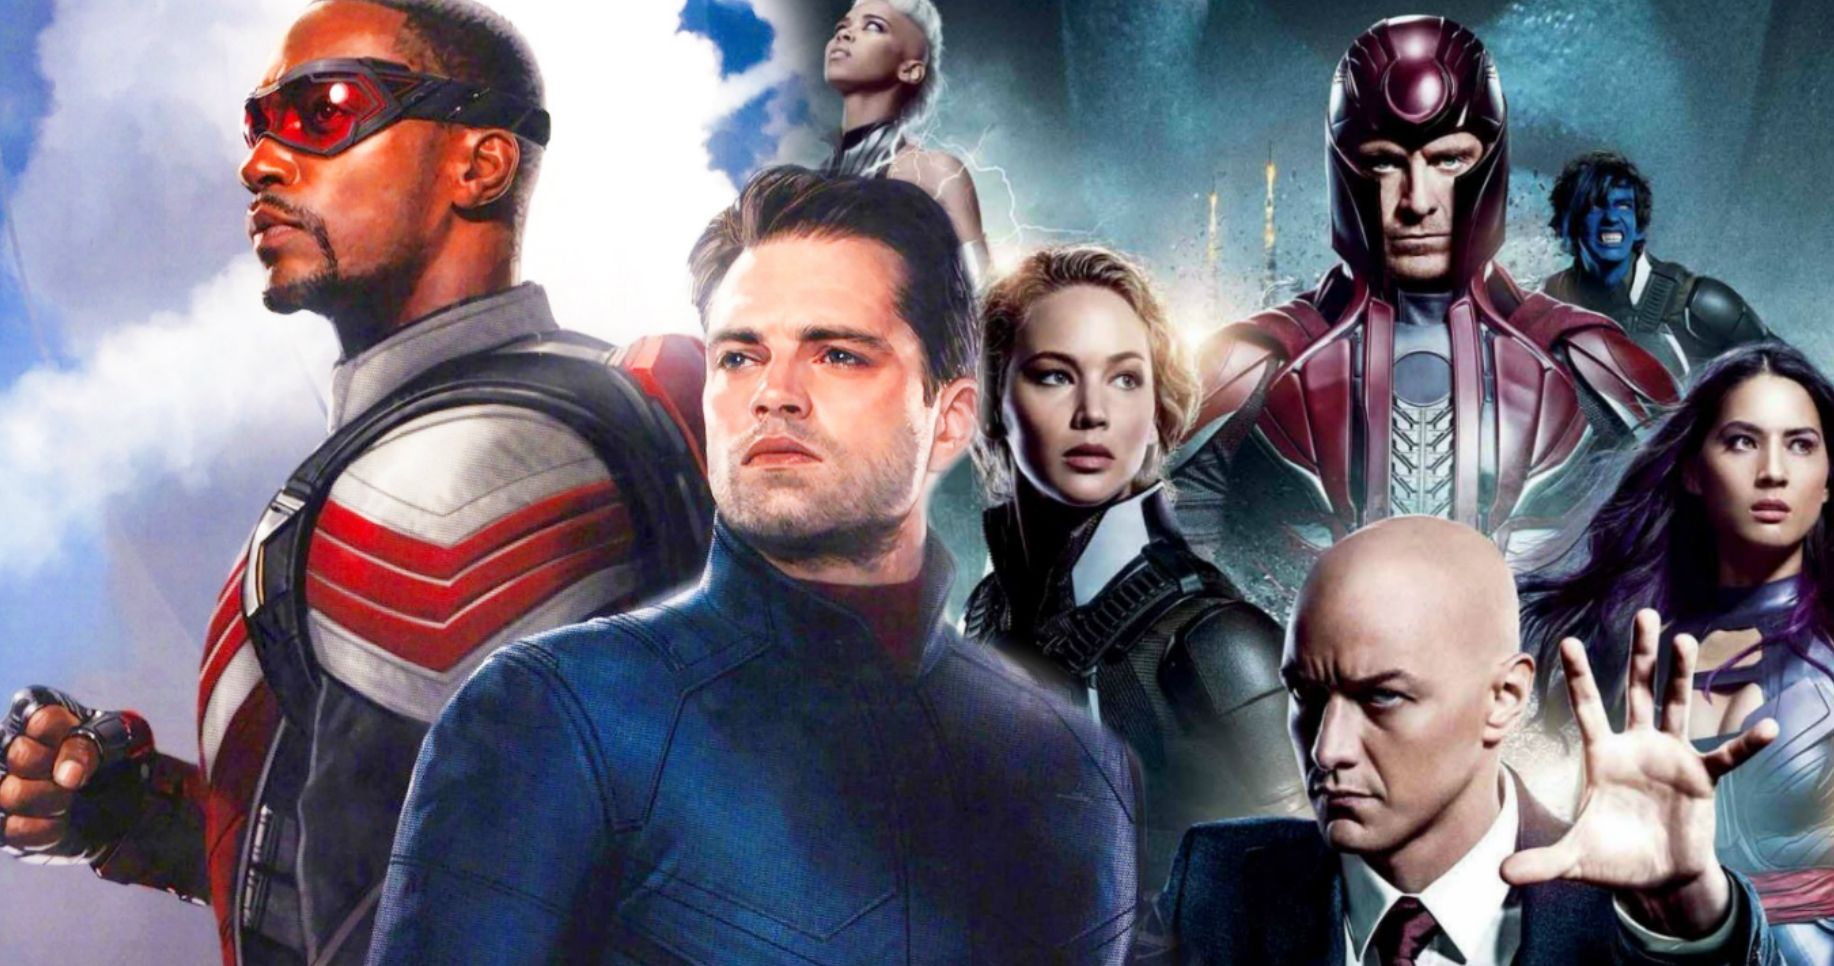 The Falcon and the Winter Soldier Set Photos Tease X-Men Connection on Disney+